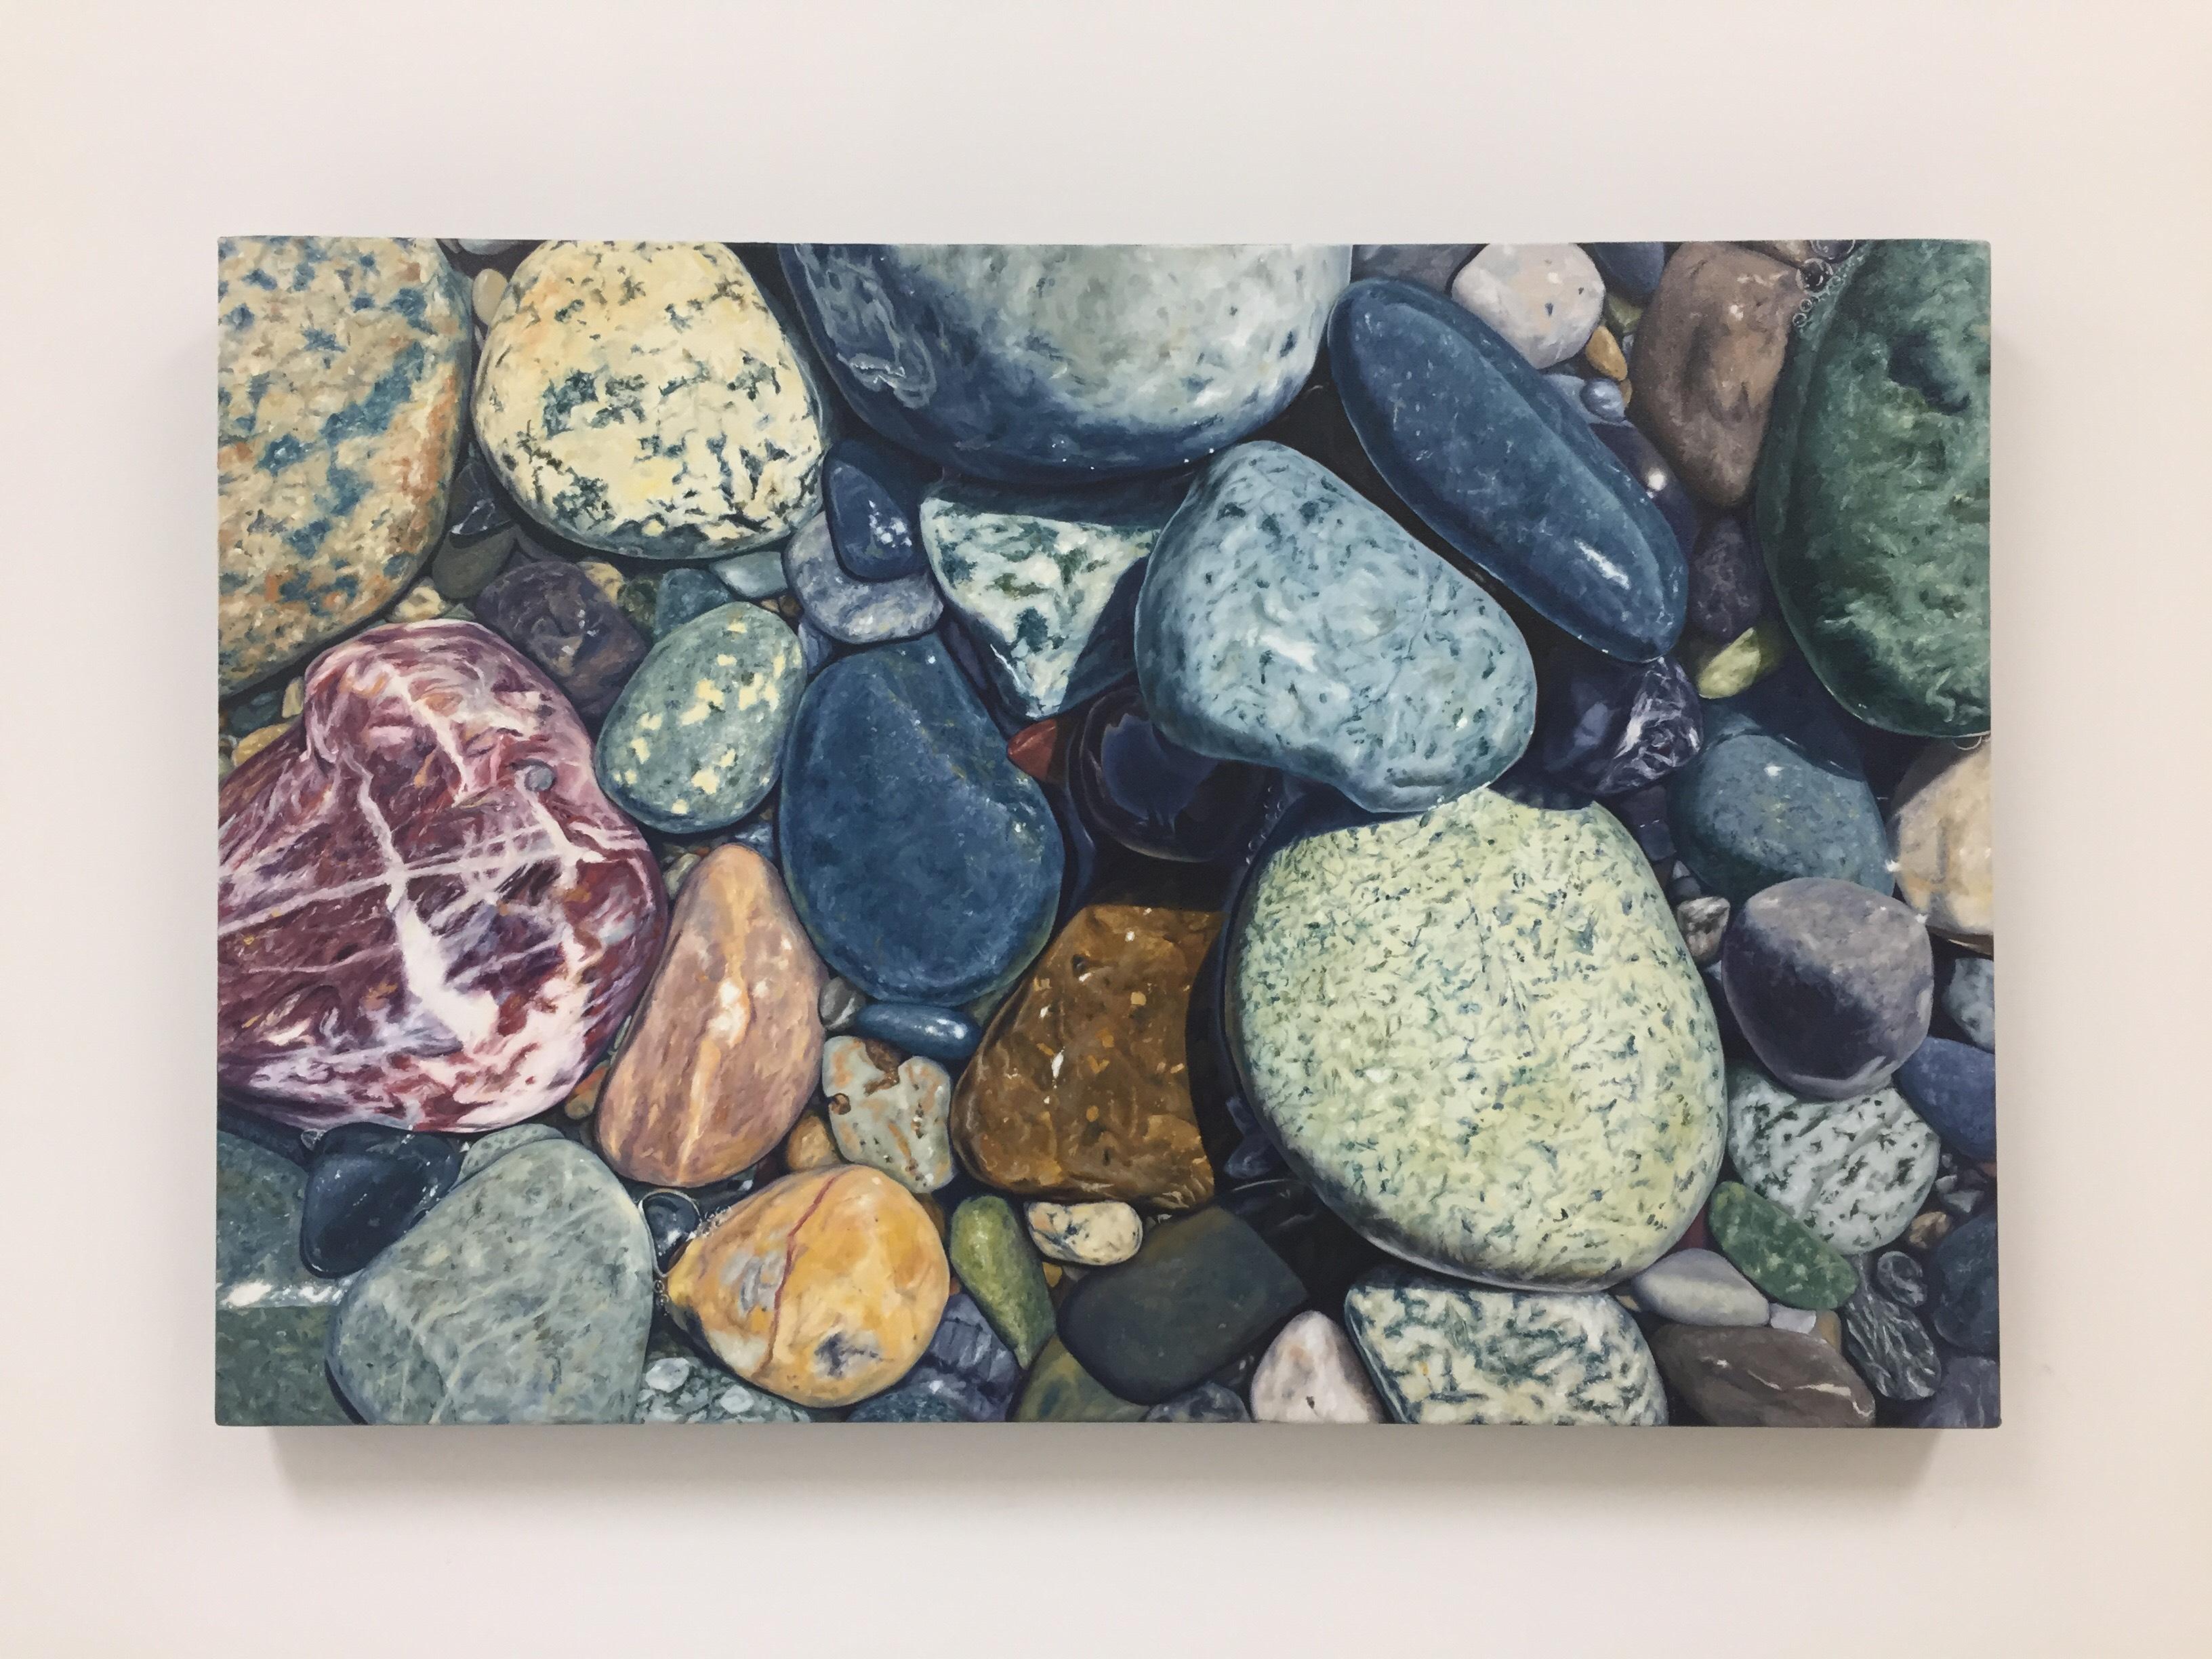 <p>Artist Comments<br />As I look at the rocks through the thinnest layer of water, the clarity of their colors shines through and is magnified. When the tide goes out, the rocks dry, lose their shine and become various shades of gray. I suppose